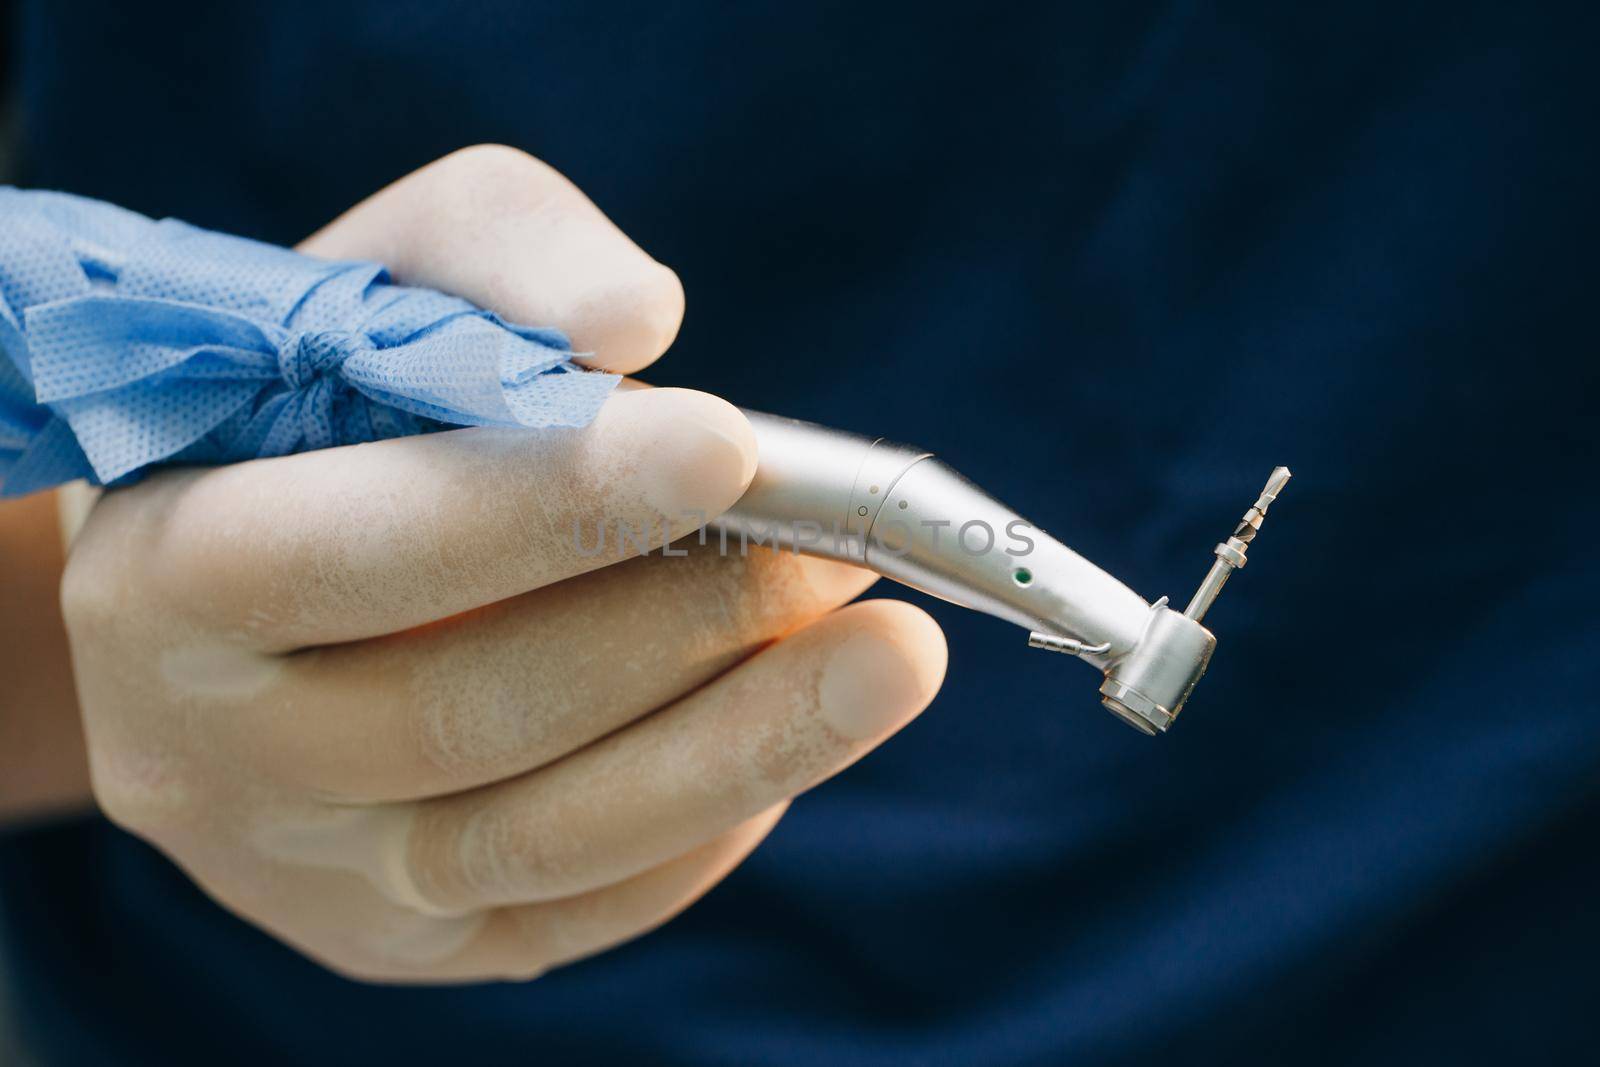 Dentist's hands with gloves working with dental drill in dental office. Dentist in sterile latex gloves holding dental tools. Dental instruments in the hands of the doctor. by uflypro